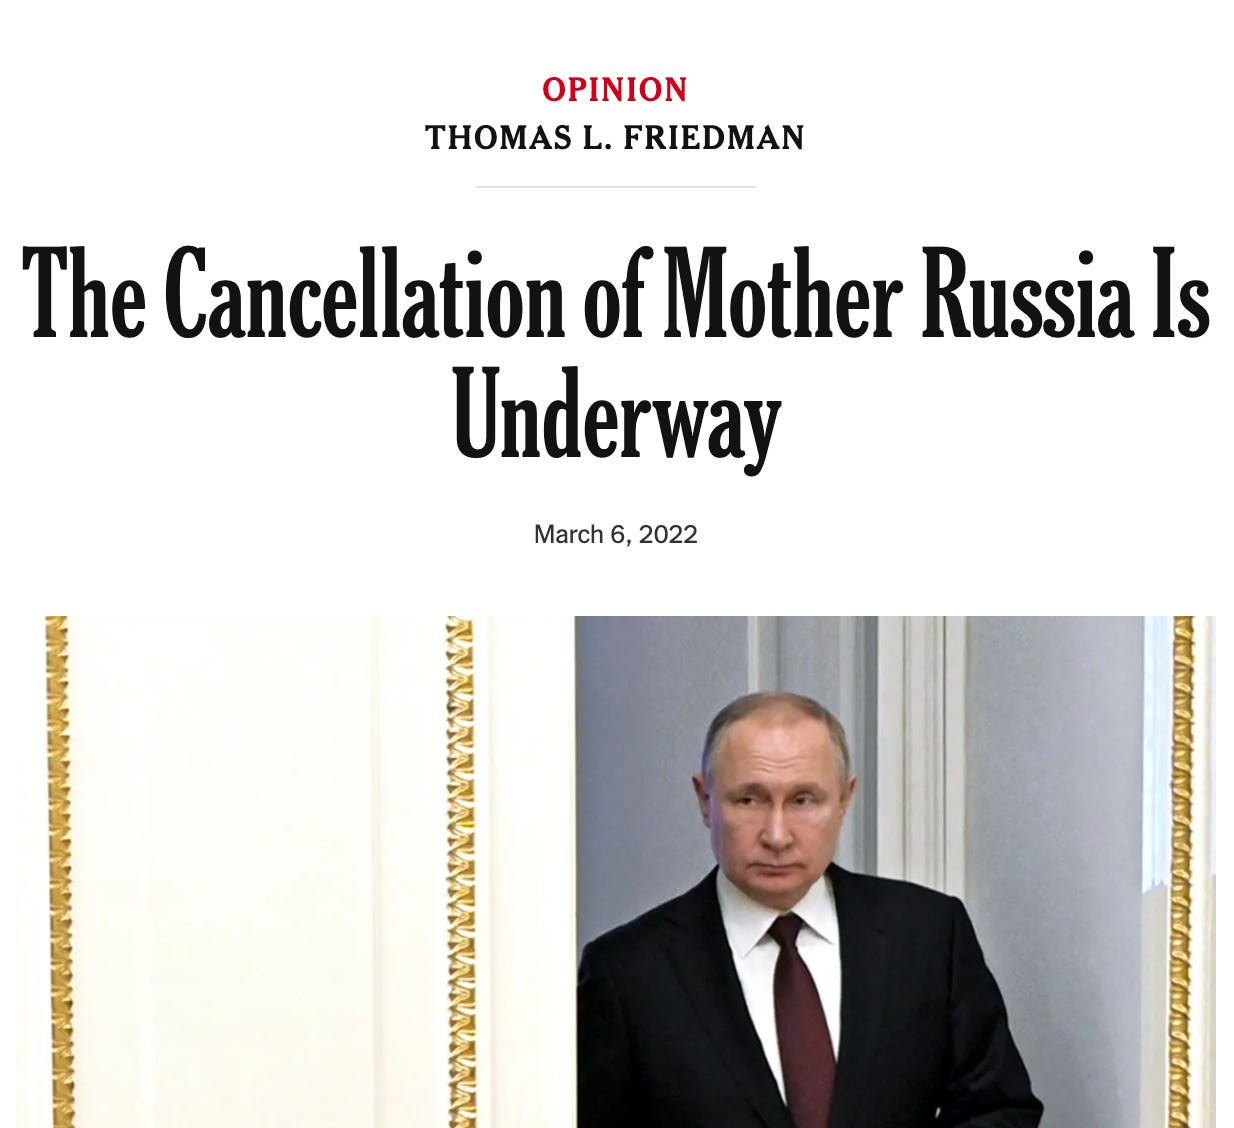 Screenshot from the Times: “Opinion, Thomas L. Friedman, ‘The Cancellation of Mother Russia is Underway’” with a hero graphic of Vladimir Putin.